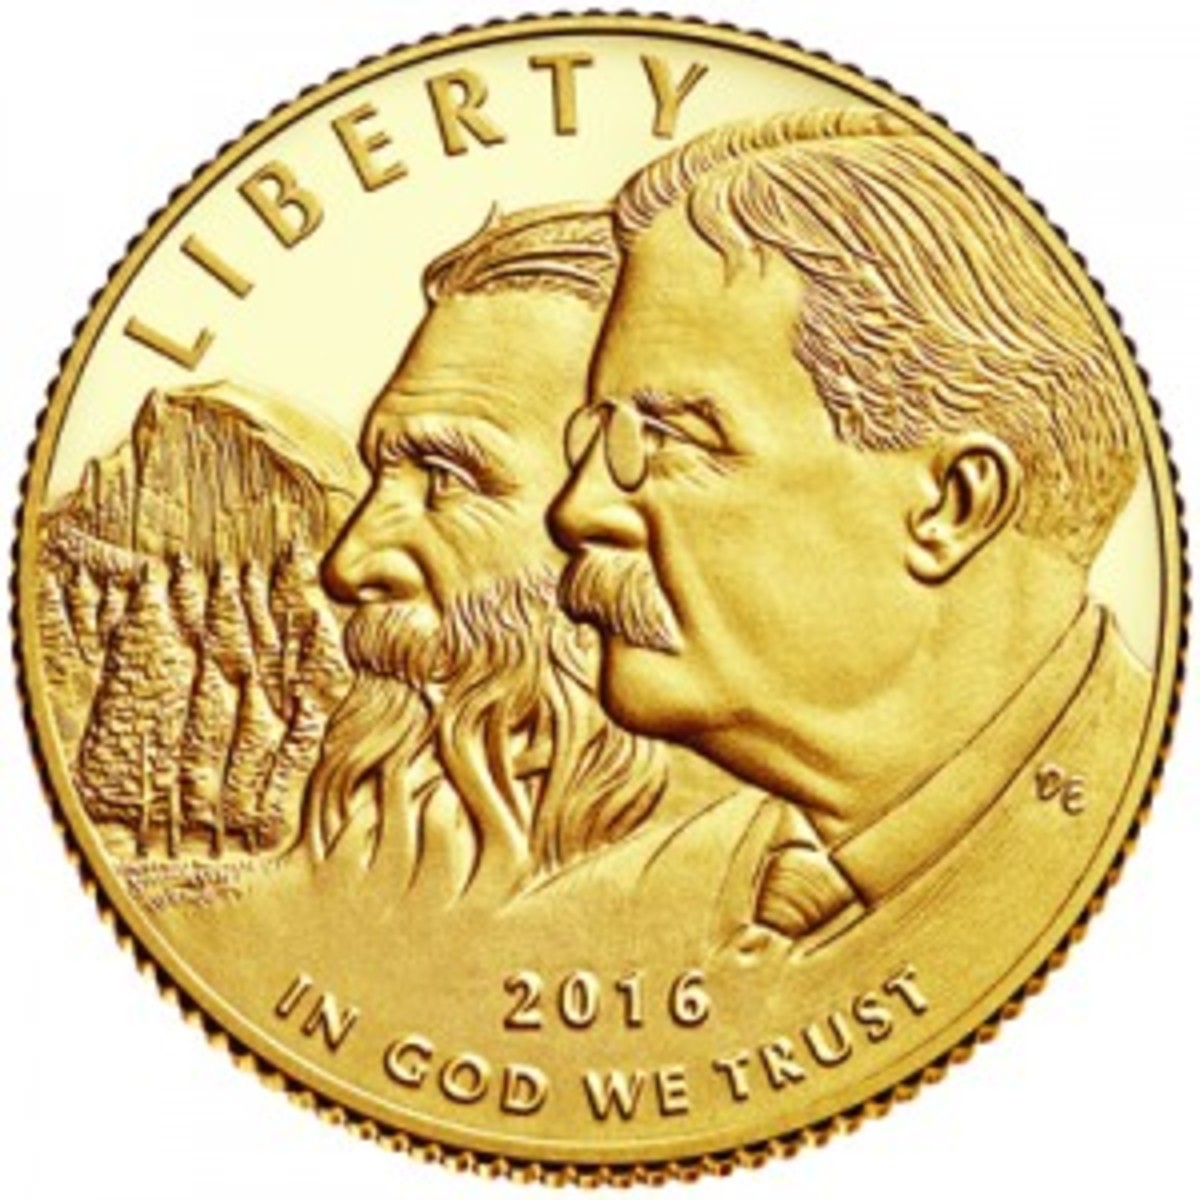 New National Park Commemorative Coin